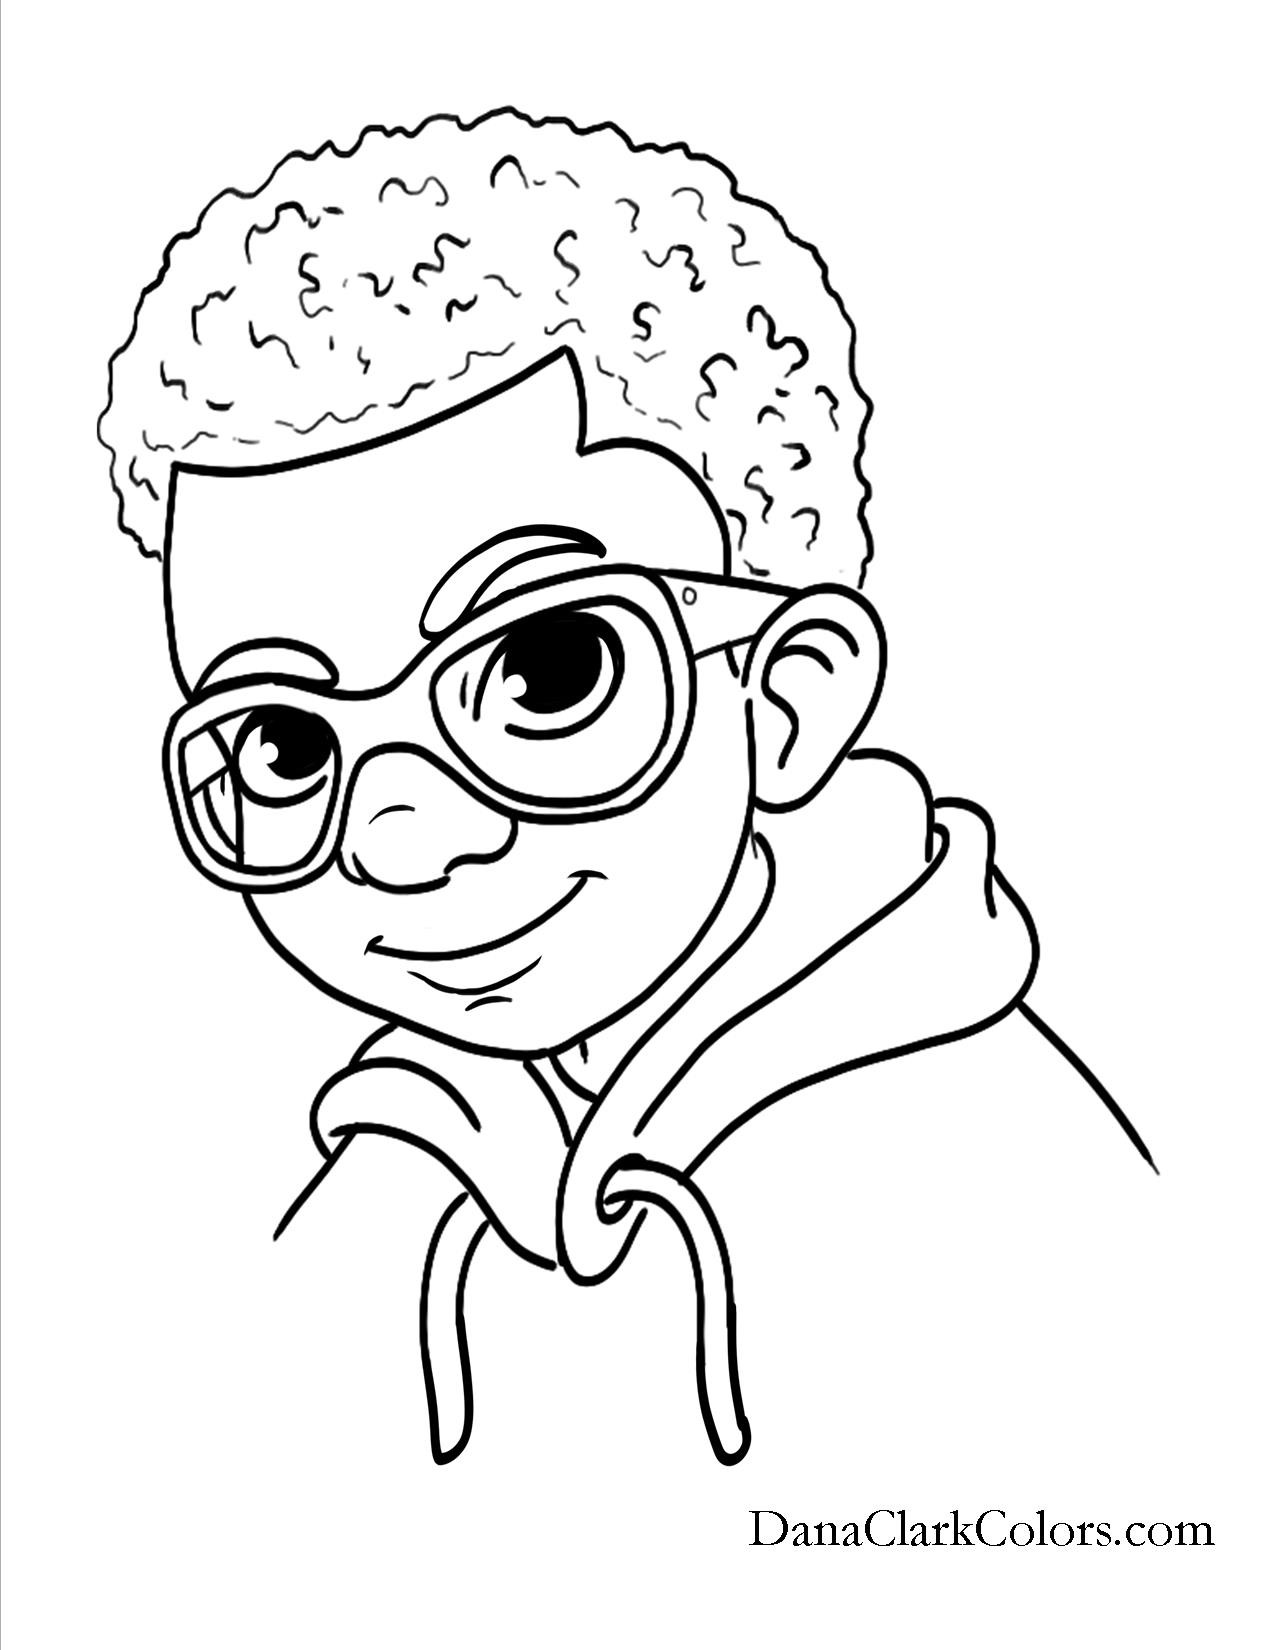 Black Girl Coloring Pages
 Free Coloring Page 6 DanaClarkColors